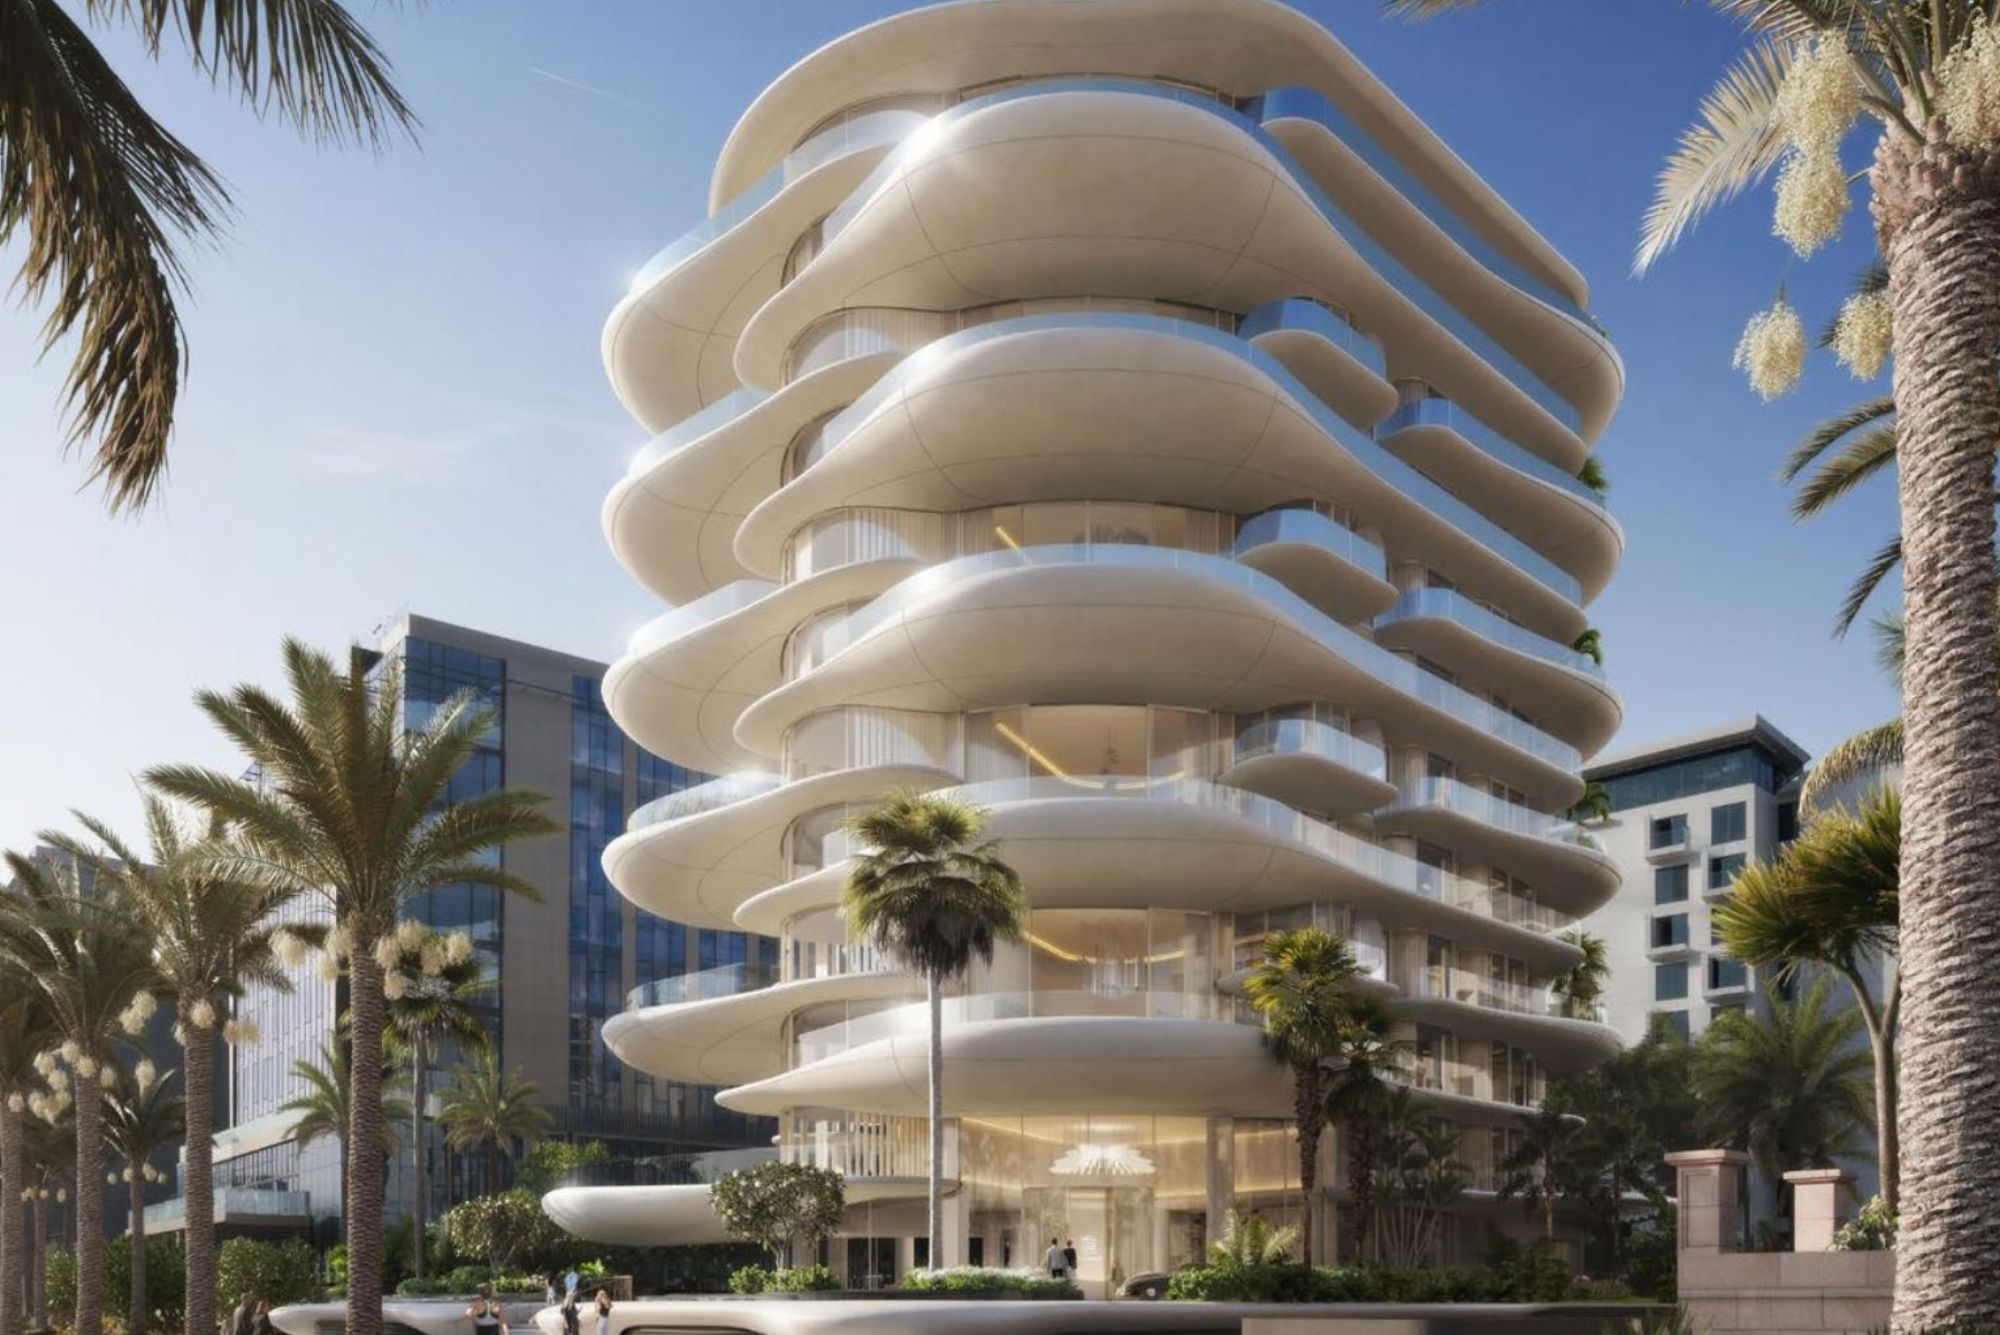 The Palm Flower is an iconic, uber-luxury development in Dubai’s Palm Jumeirah